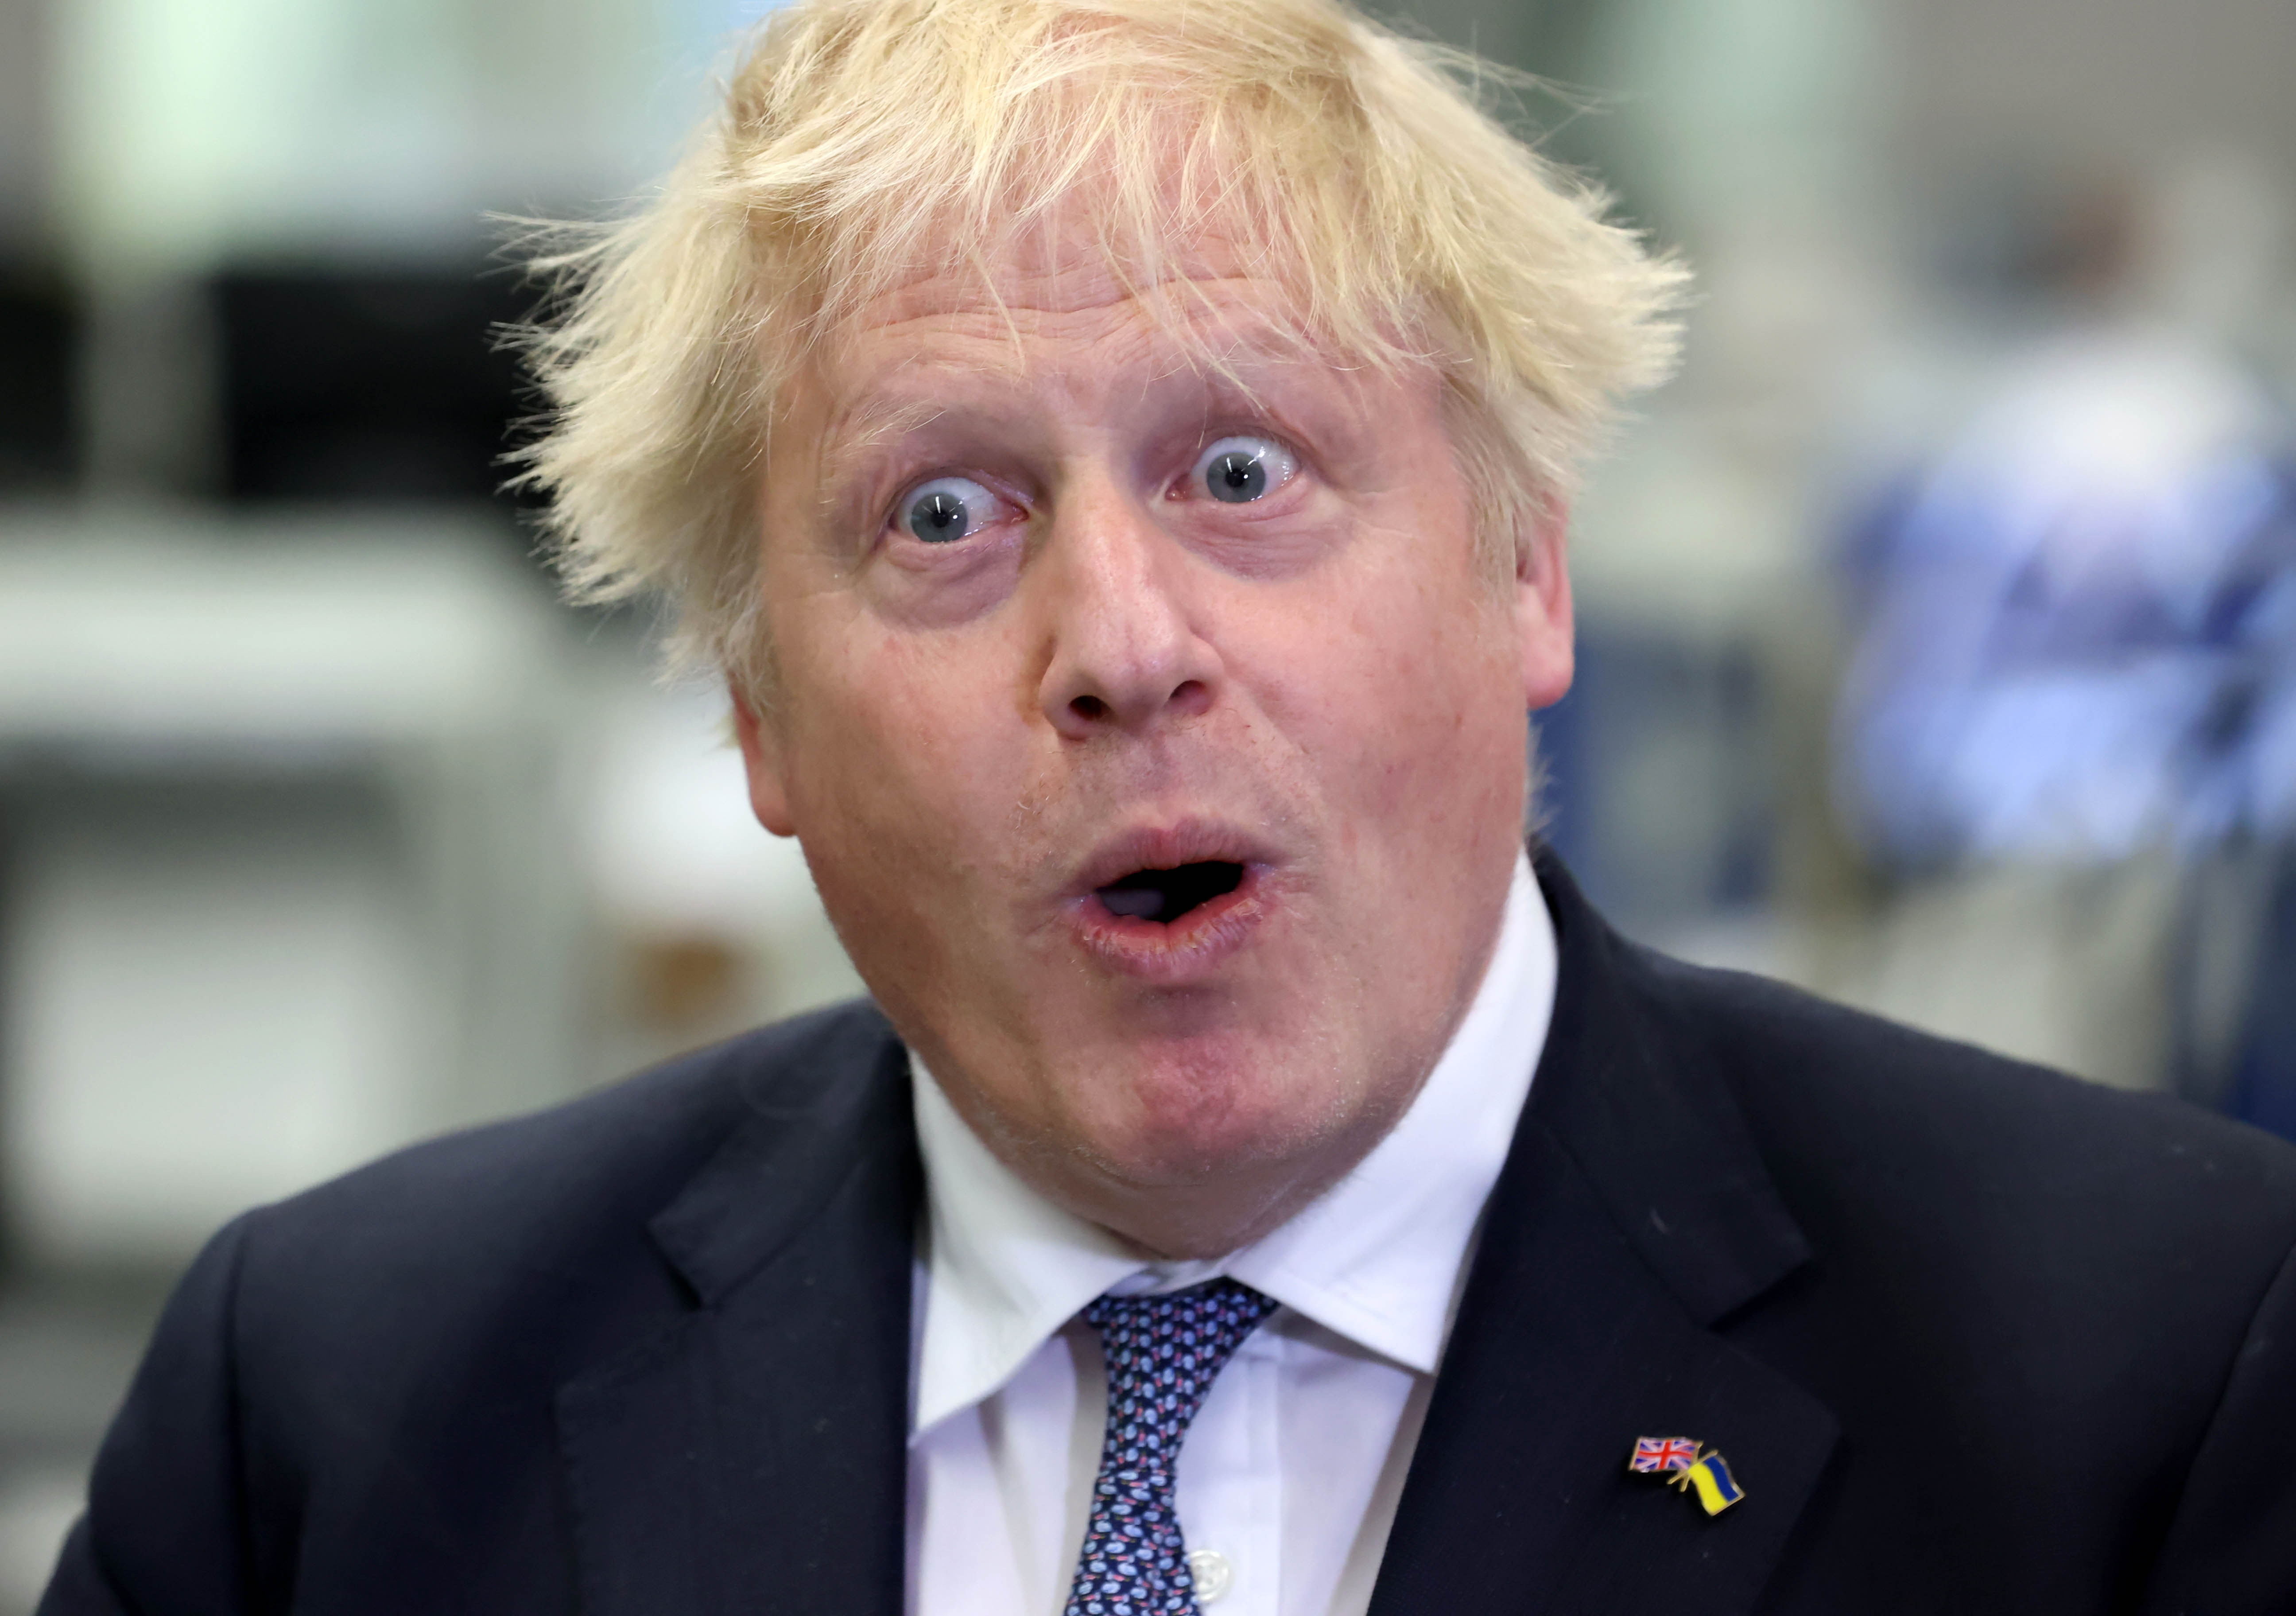 The Labour Party wanted to transform him into a string of pork sausages, but perhaps for Johnson, the ‘wurst’ may be over